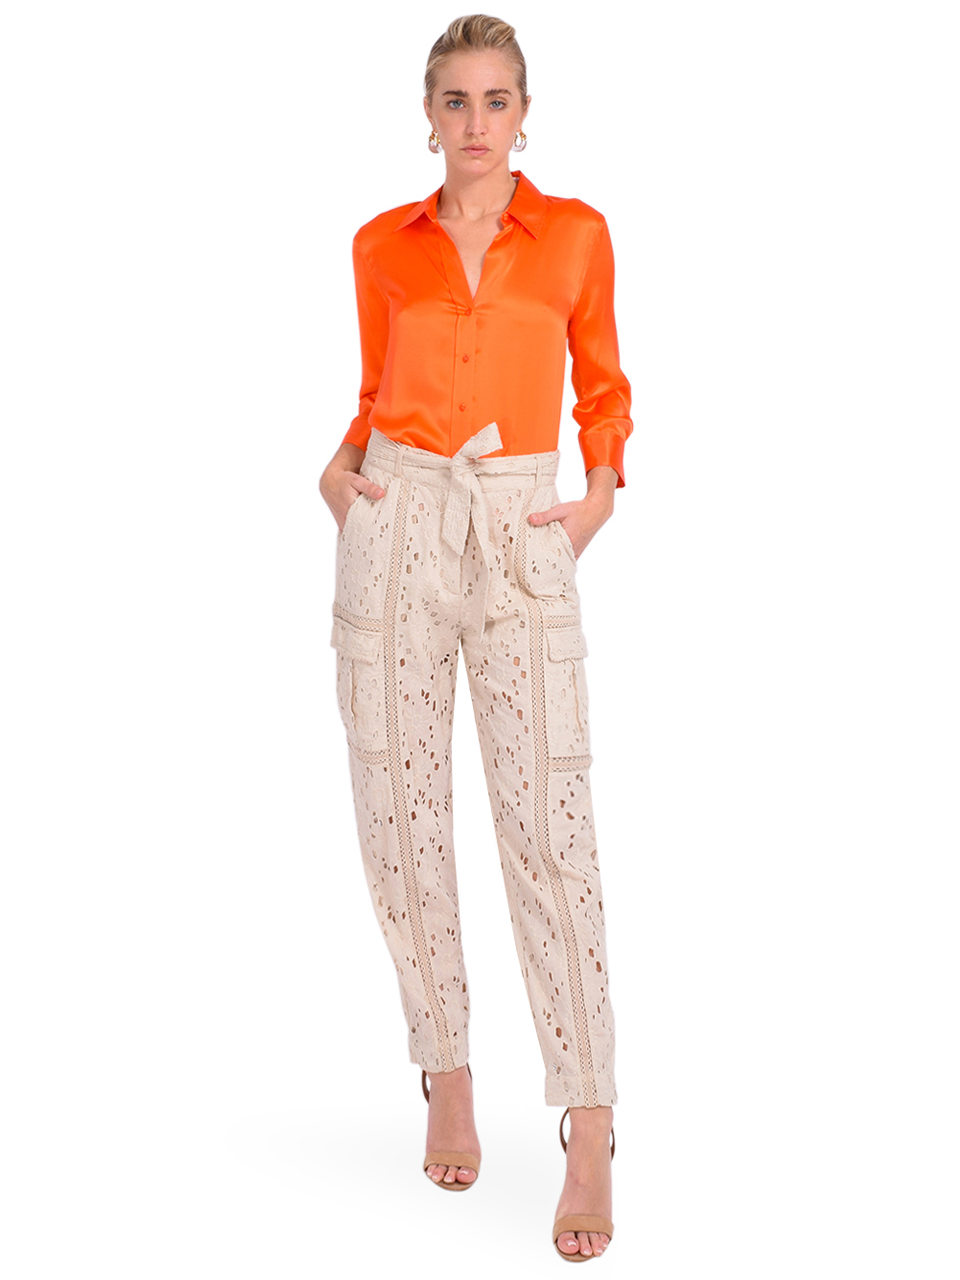 L'AGENCE Dani Button Front Blouse in Bright Orange Full Outfit 